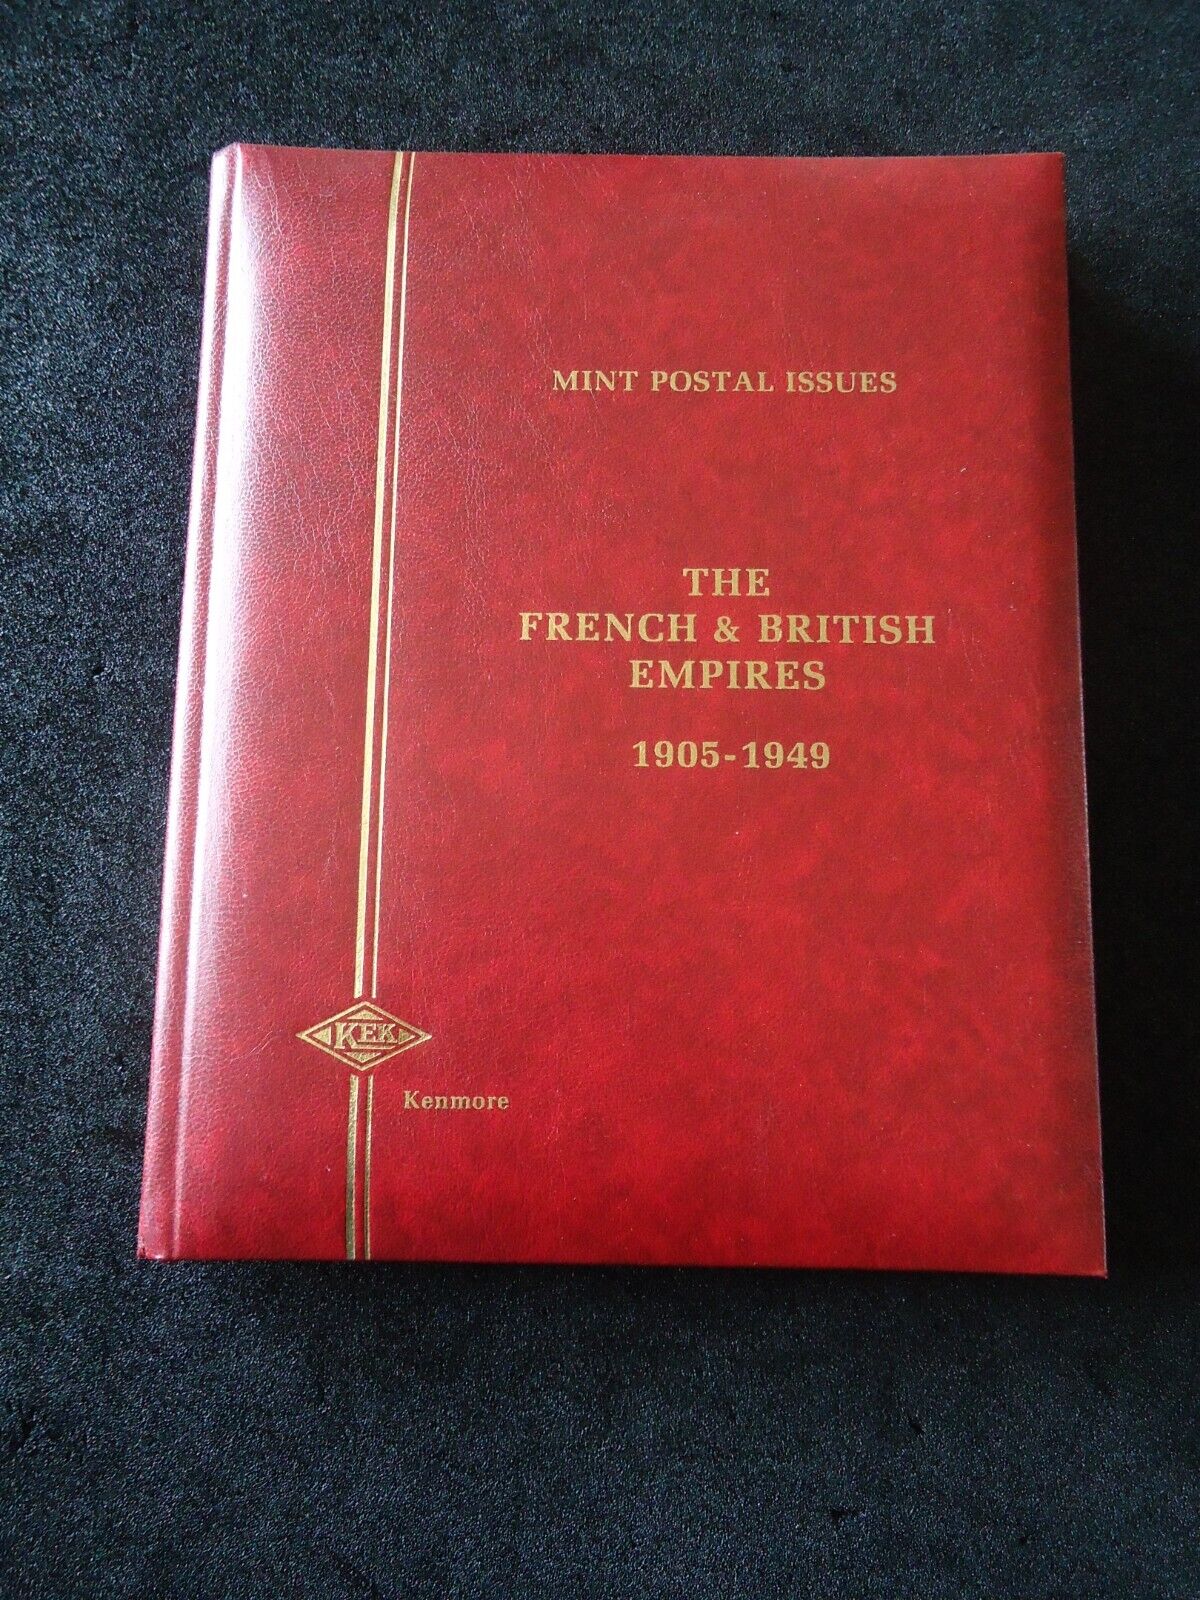 The French & British Empires 1905-1949  Mint postal stamps issues in Red album